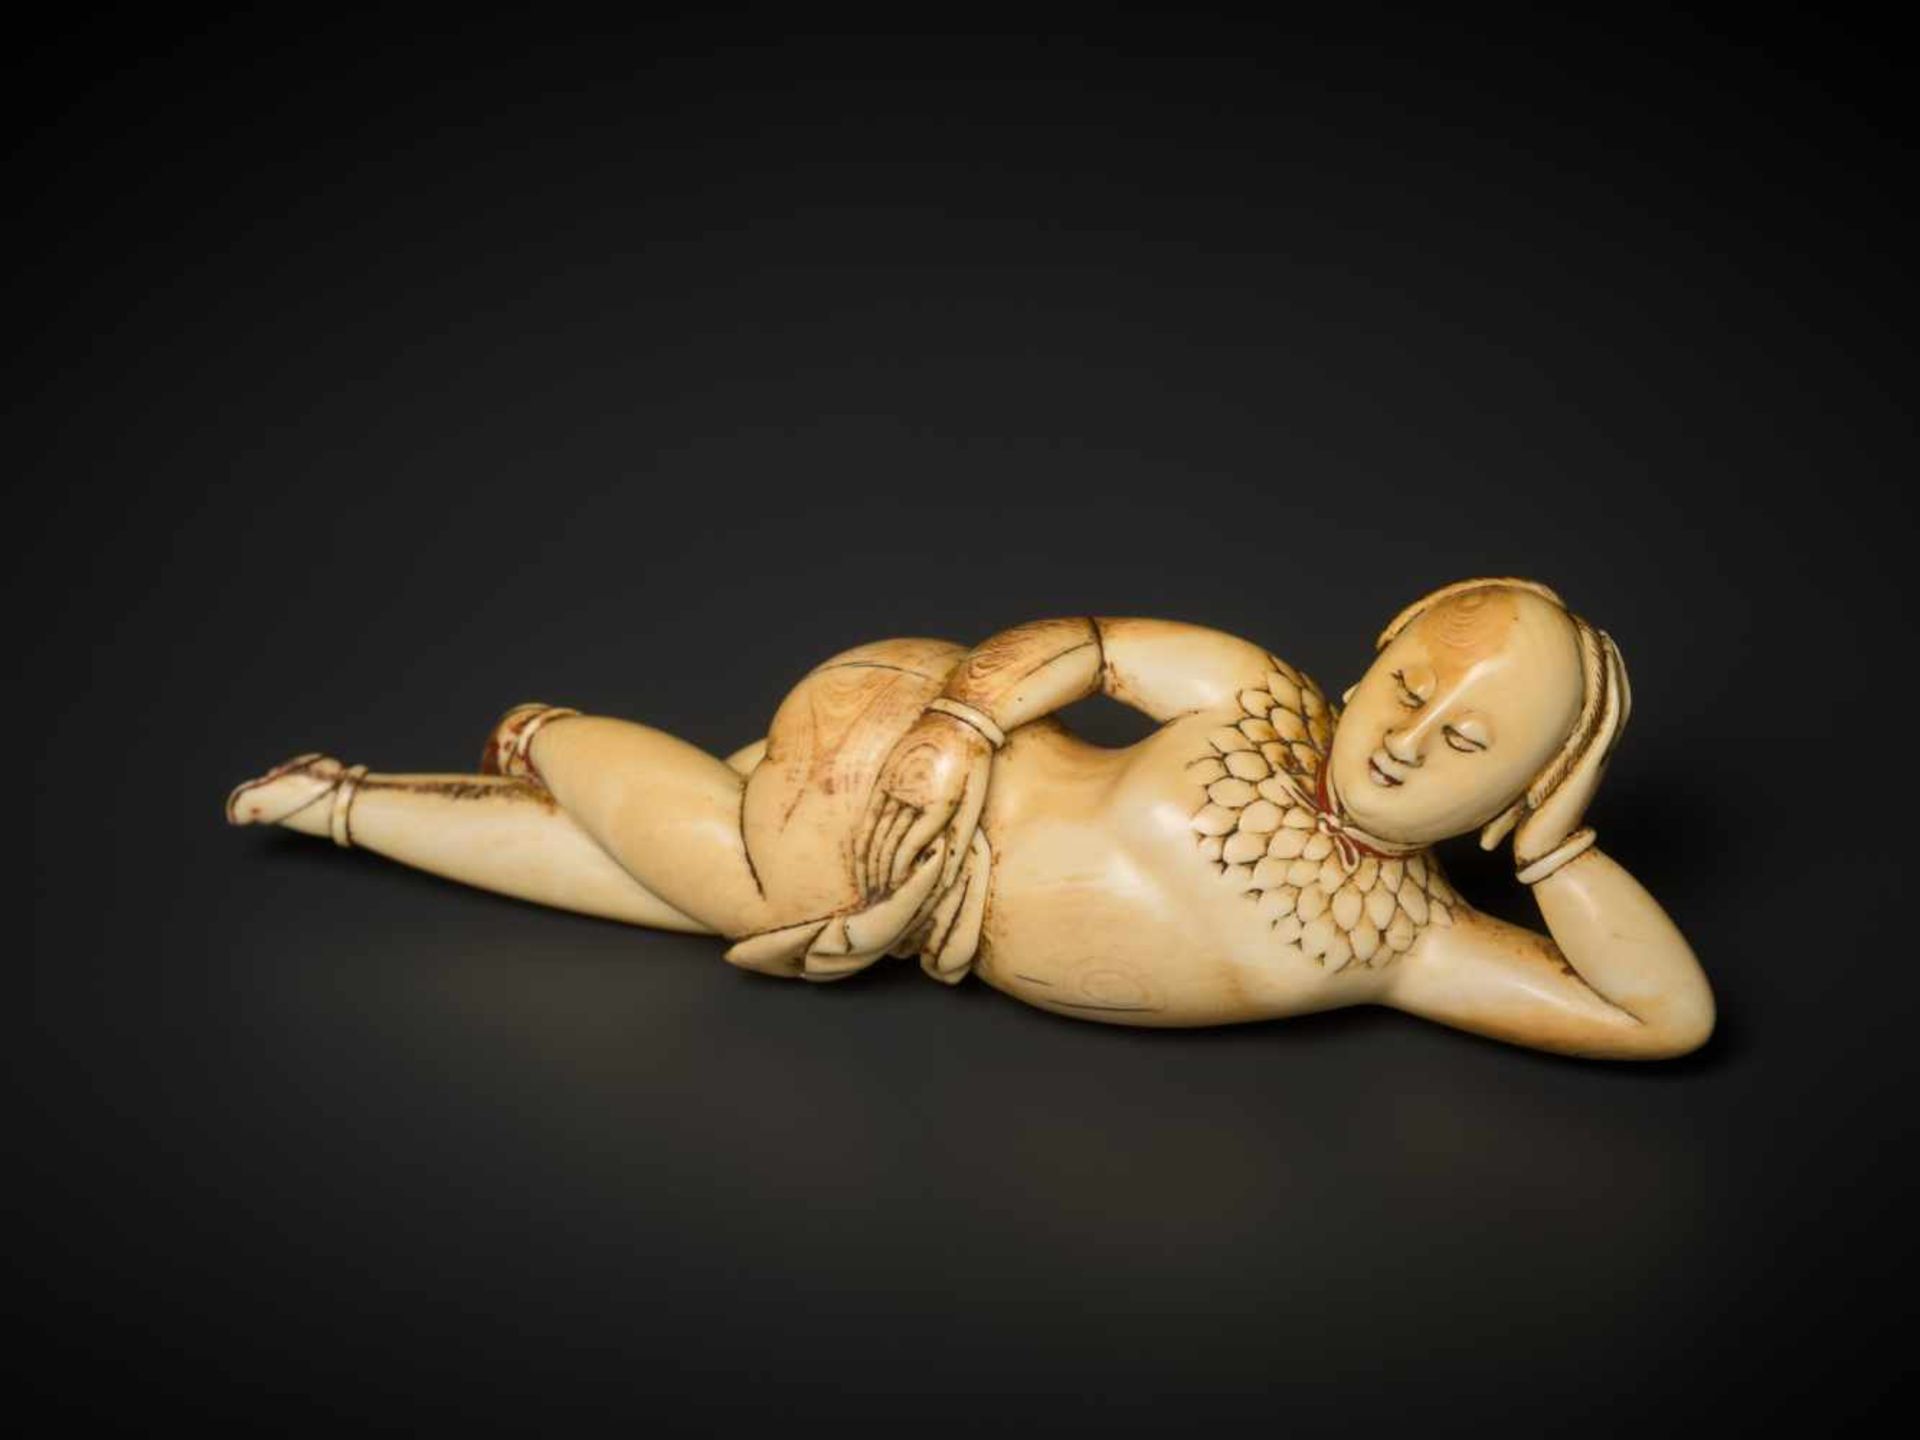 A CARVED 17th CENTURY IVORY FIGURE OF A RECLINING WOMAN Ivory, sparse remains of paintwork. Rosewood